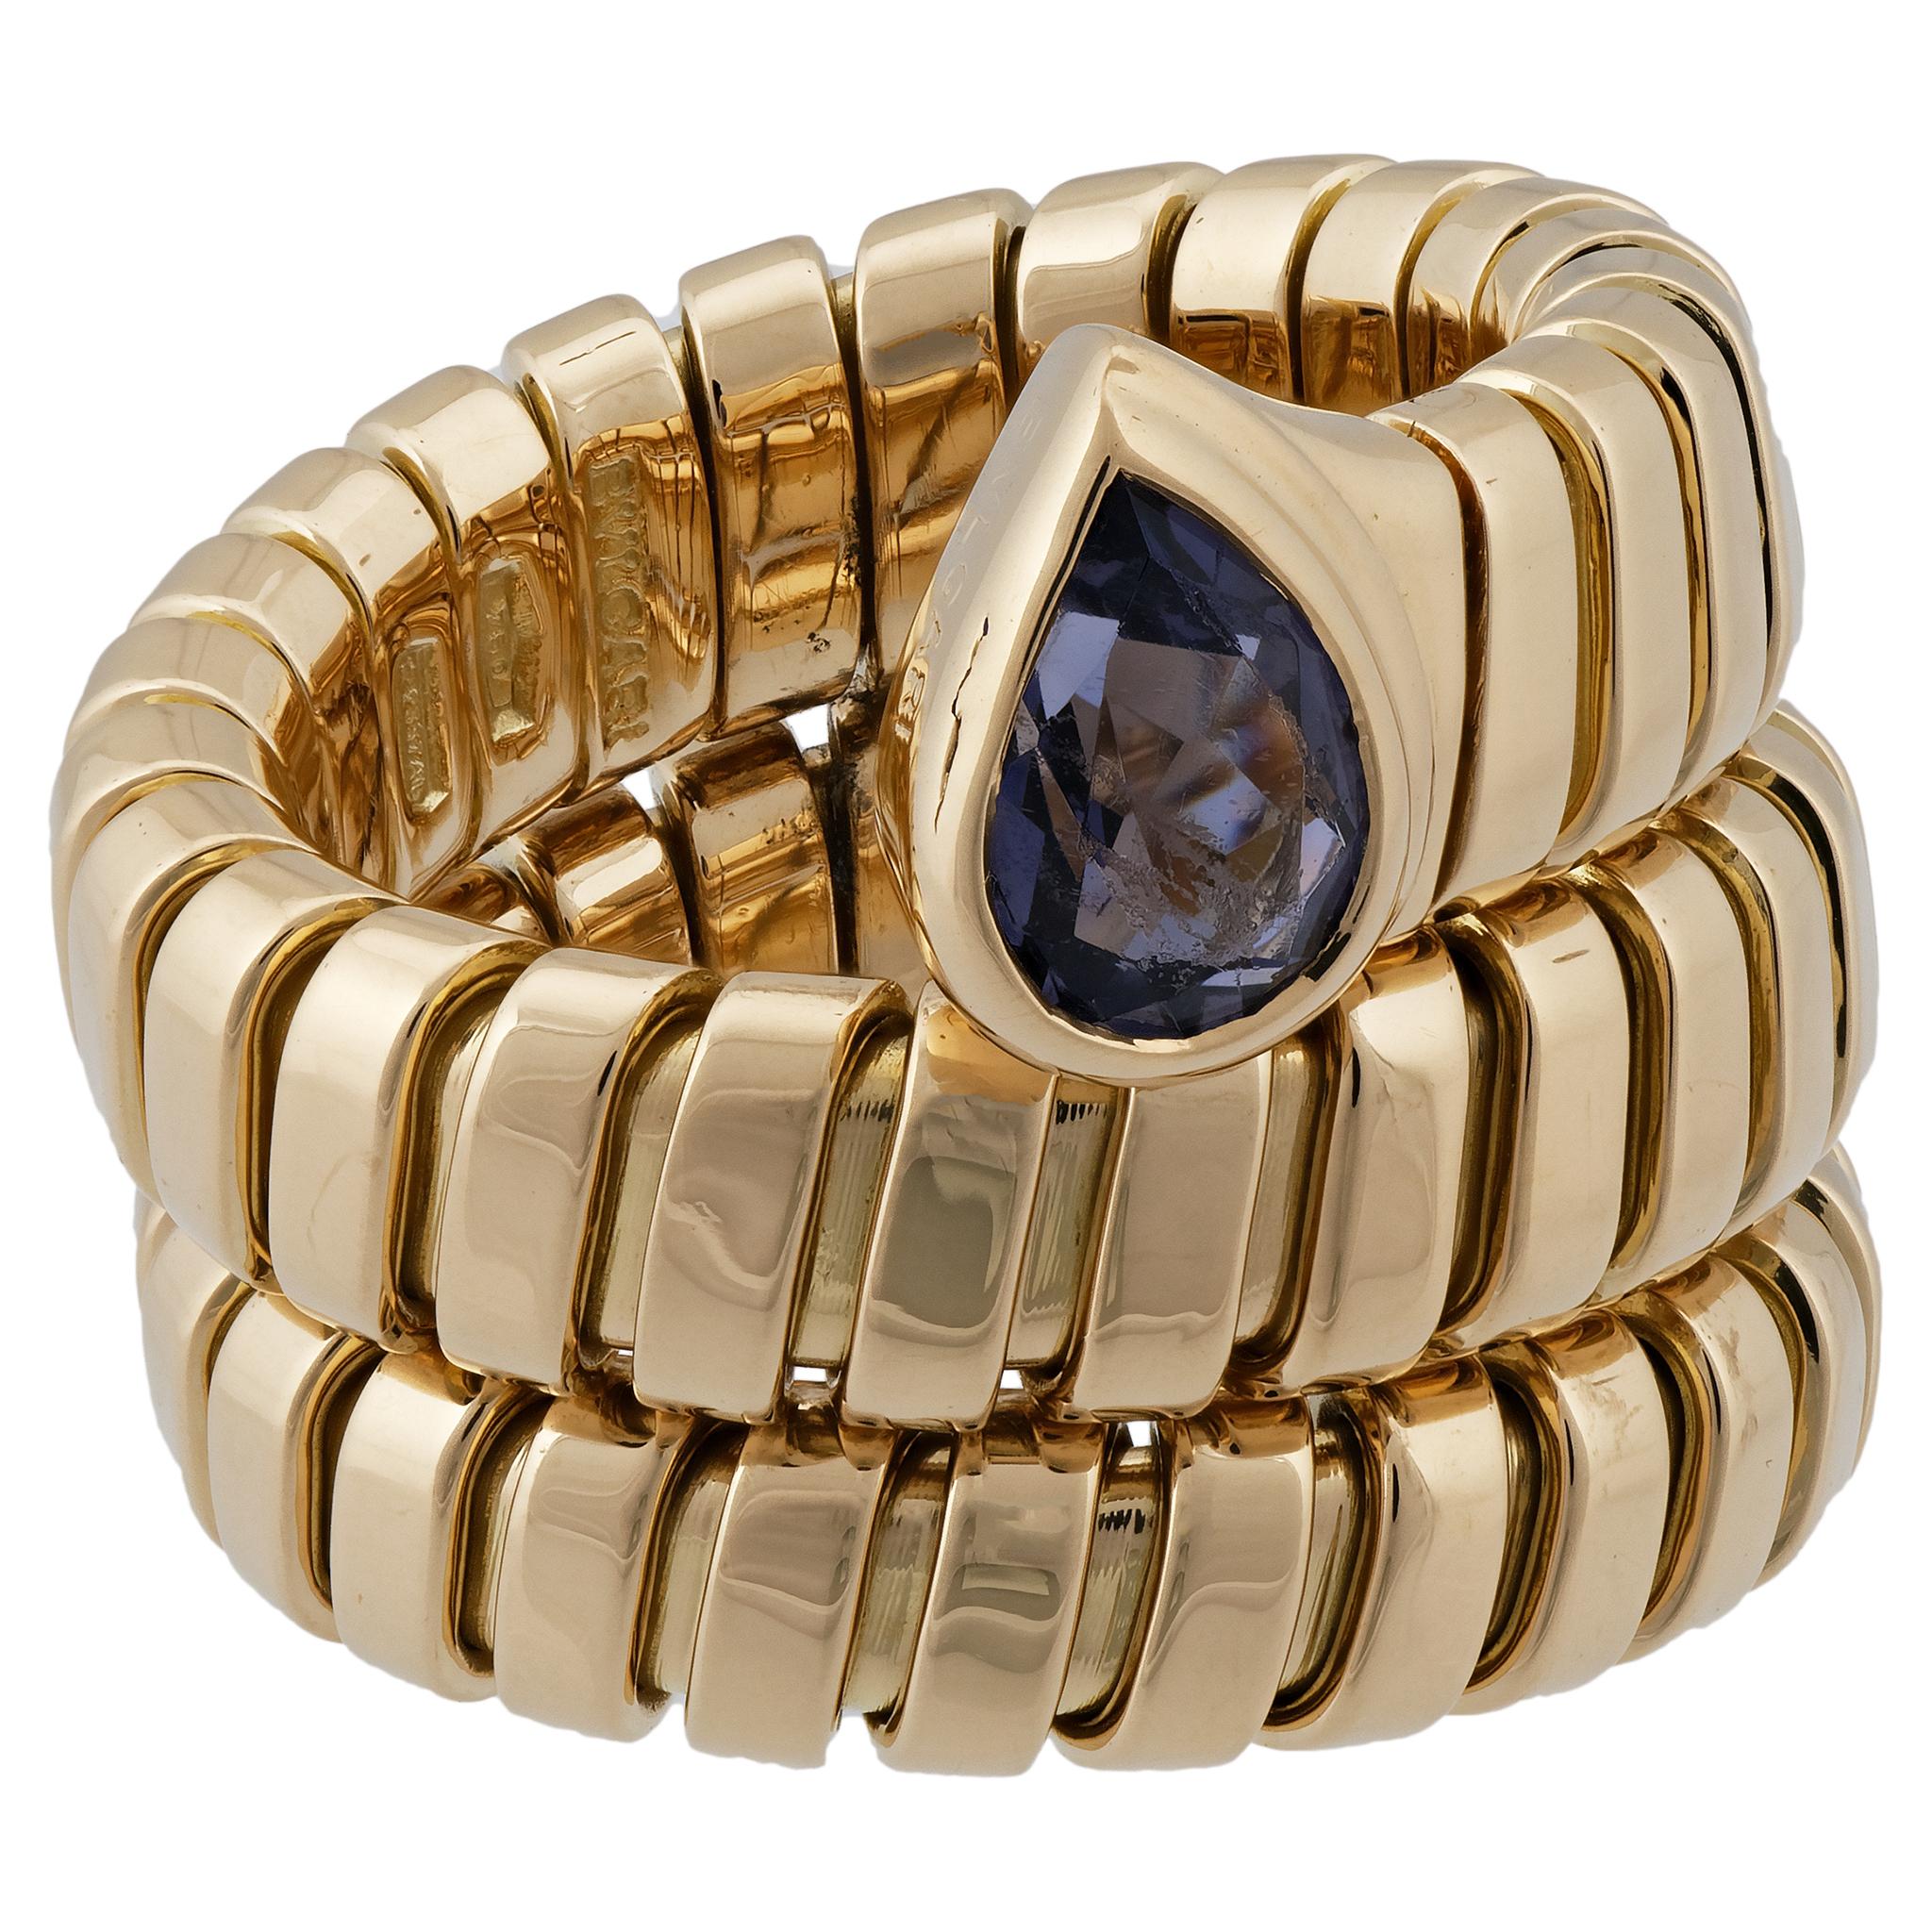 The serpentine, weaving yellow gold band is enough to make this ring a conversation starter, but the captivating, soothing and altogether rich hue of the amethyst takes it to a whole new level. Sophisticated and chic.

METAL TYPE: 18K Yellow